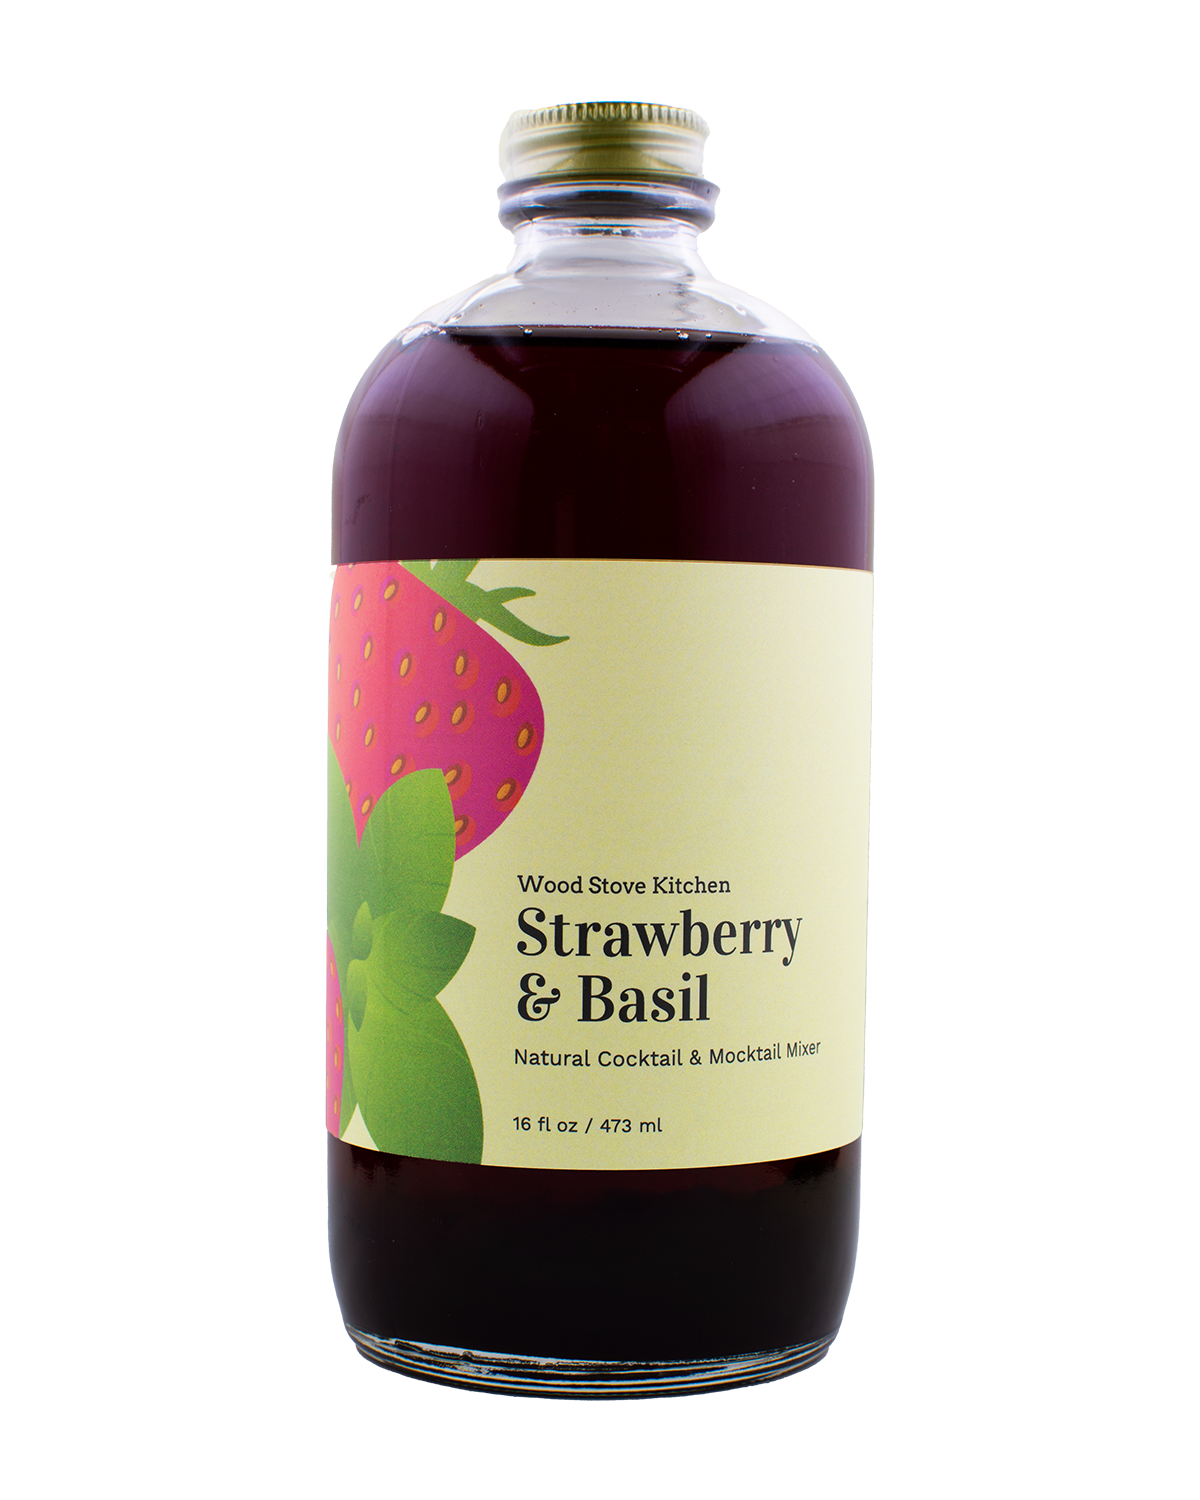 Wood Stove Kitchen - Strawberry And Basil Cocktail & Drink Mix, 16 fl oz